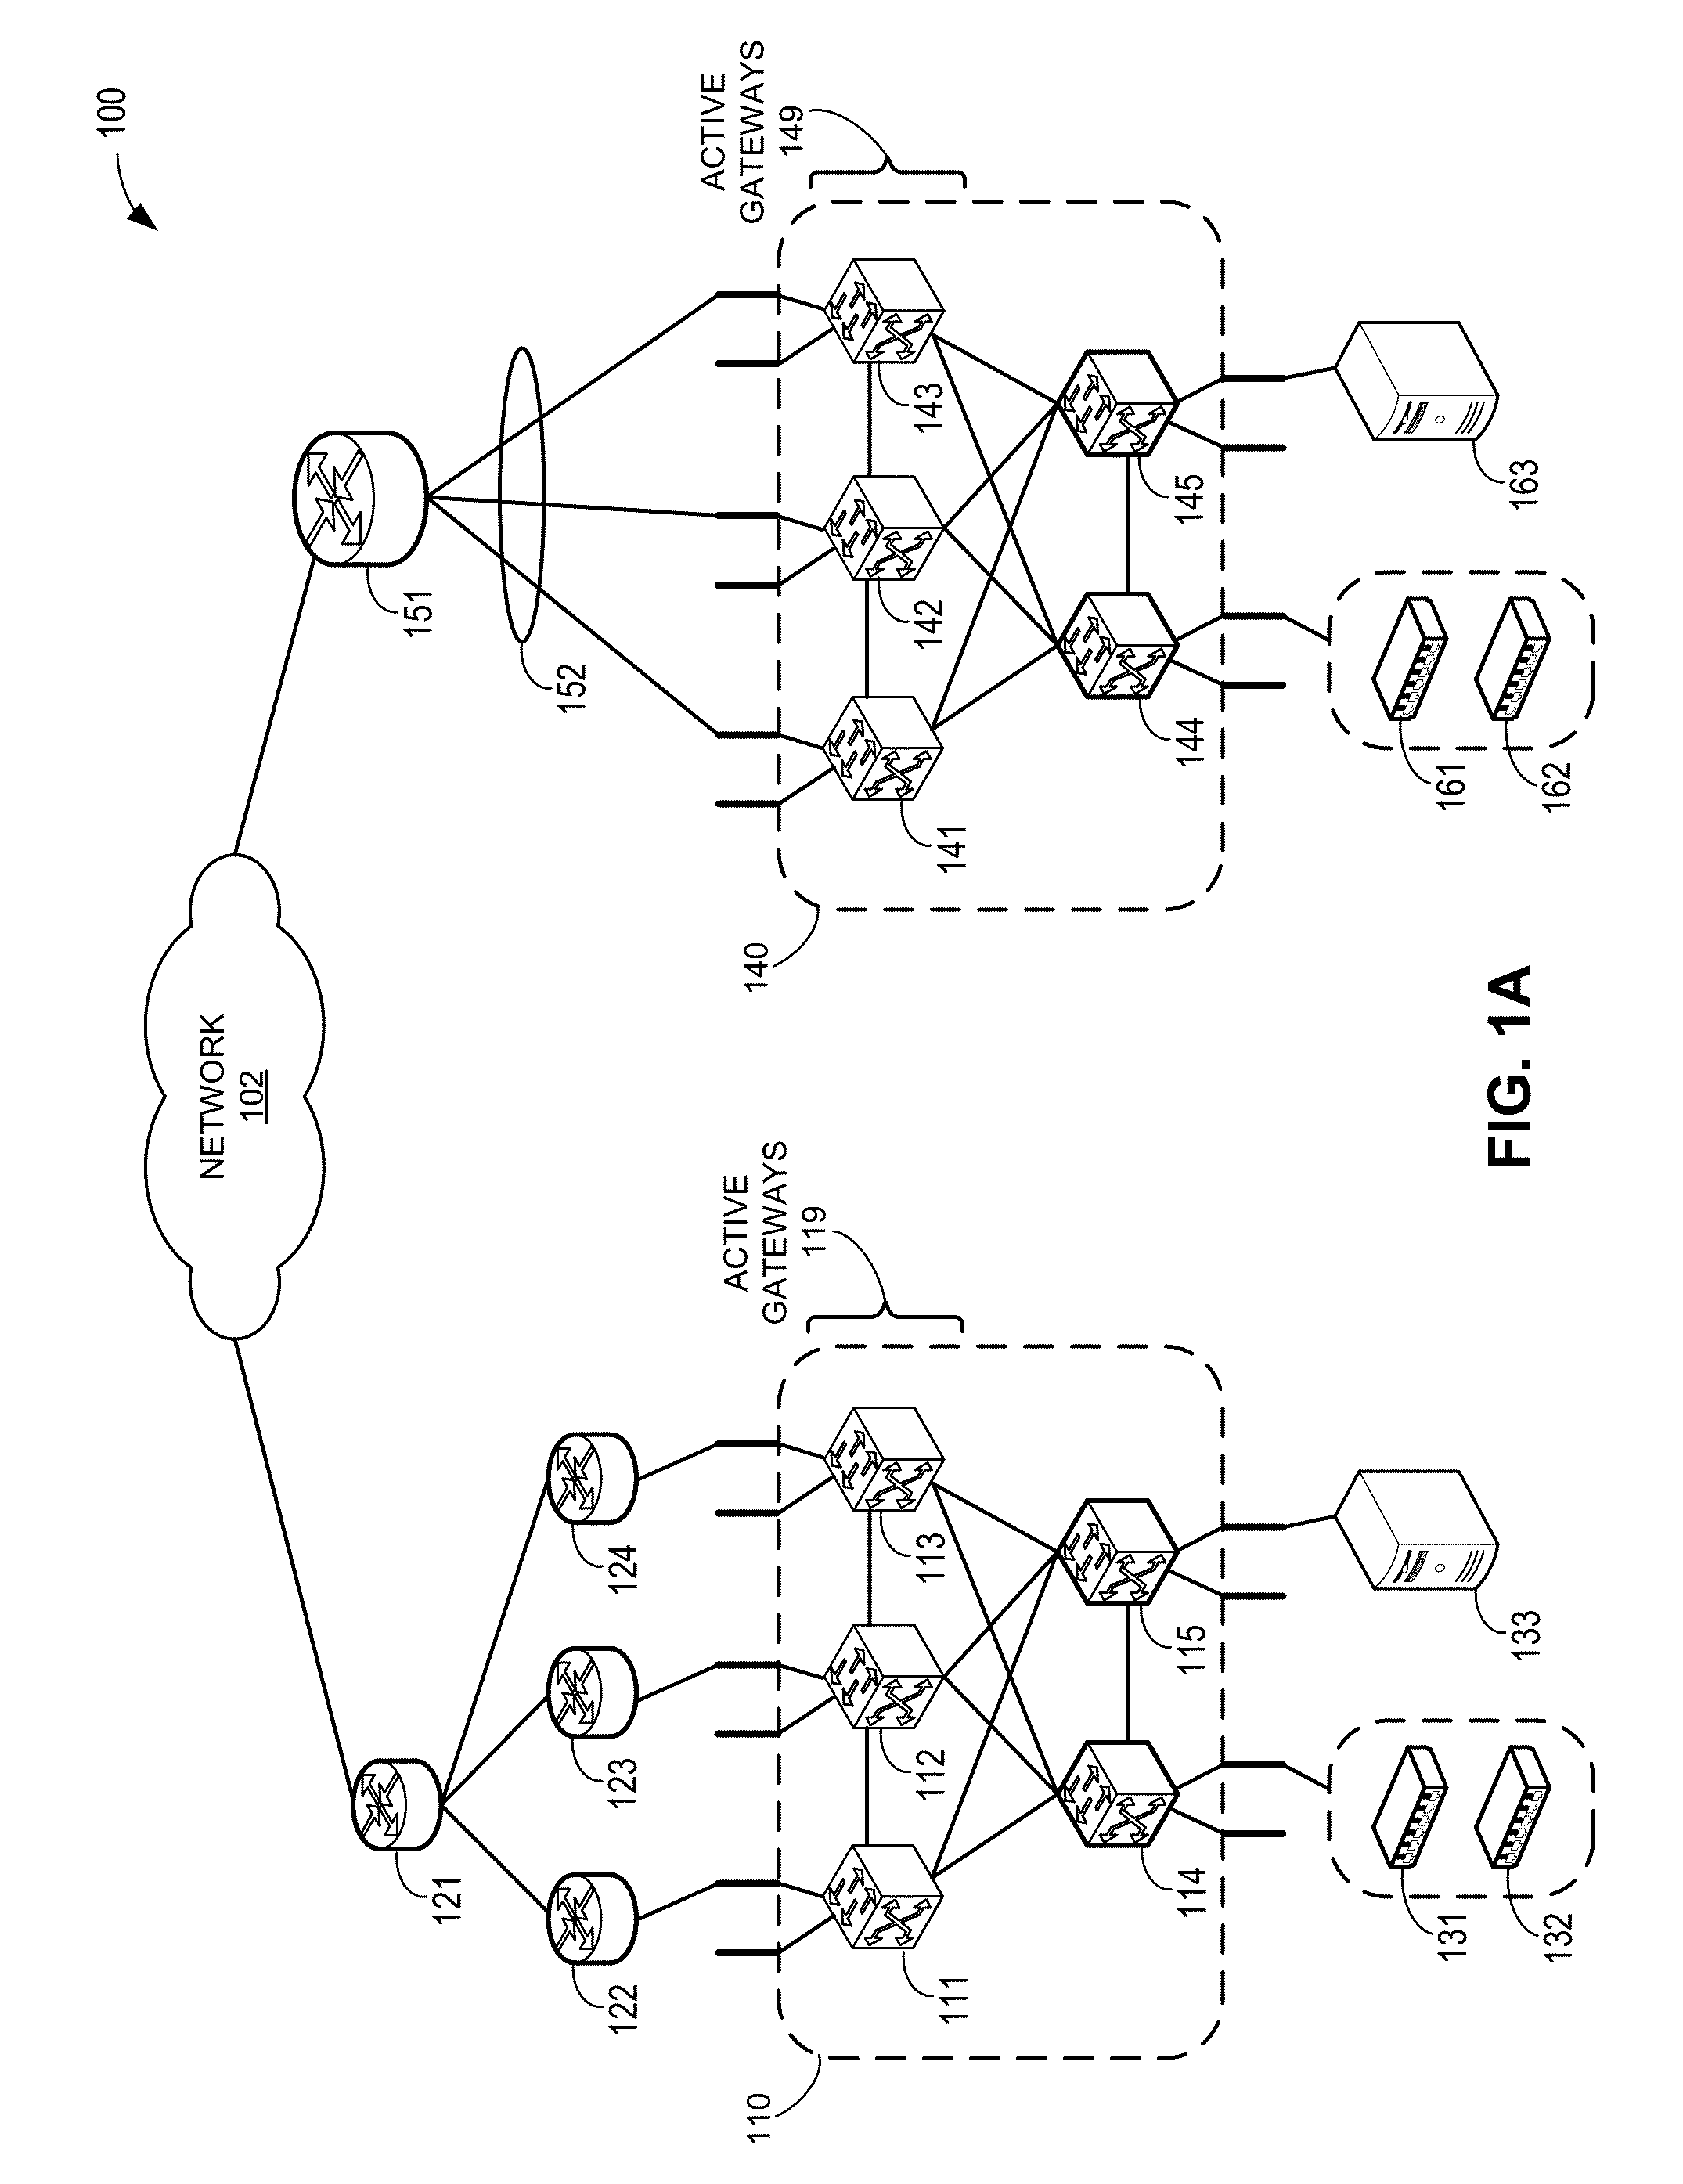 Distributed bidirectional forwarding detection protocol (d-bfd) for cluster of interconnected switches